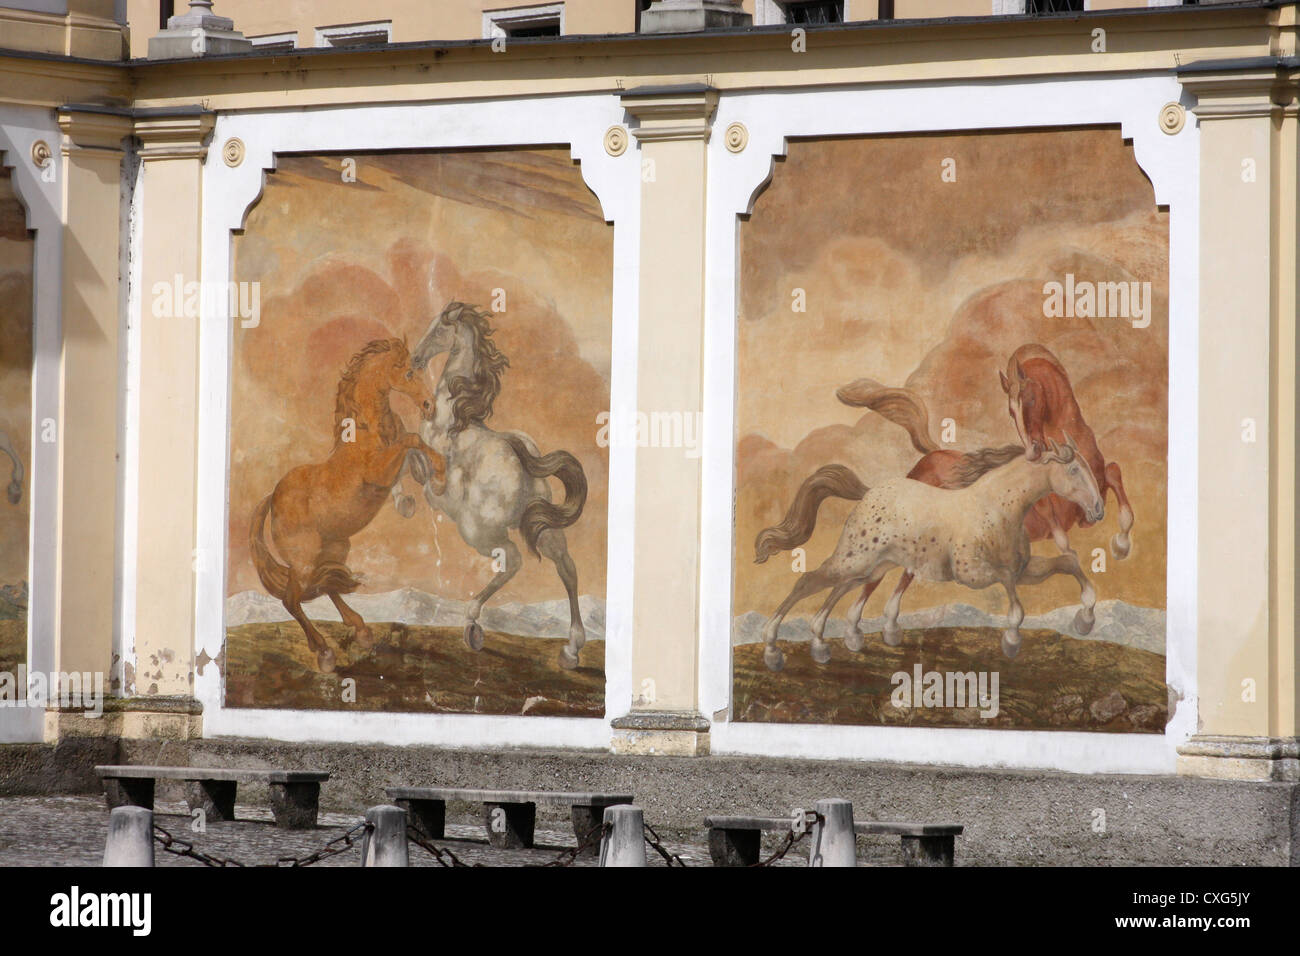 The Horse Wash ? Pferdeschwemme,beautifully painted horse fresco's in the old town Salzburg,Austria,also a lovely horse statue Stock Photo